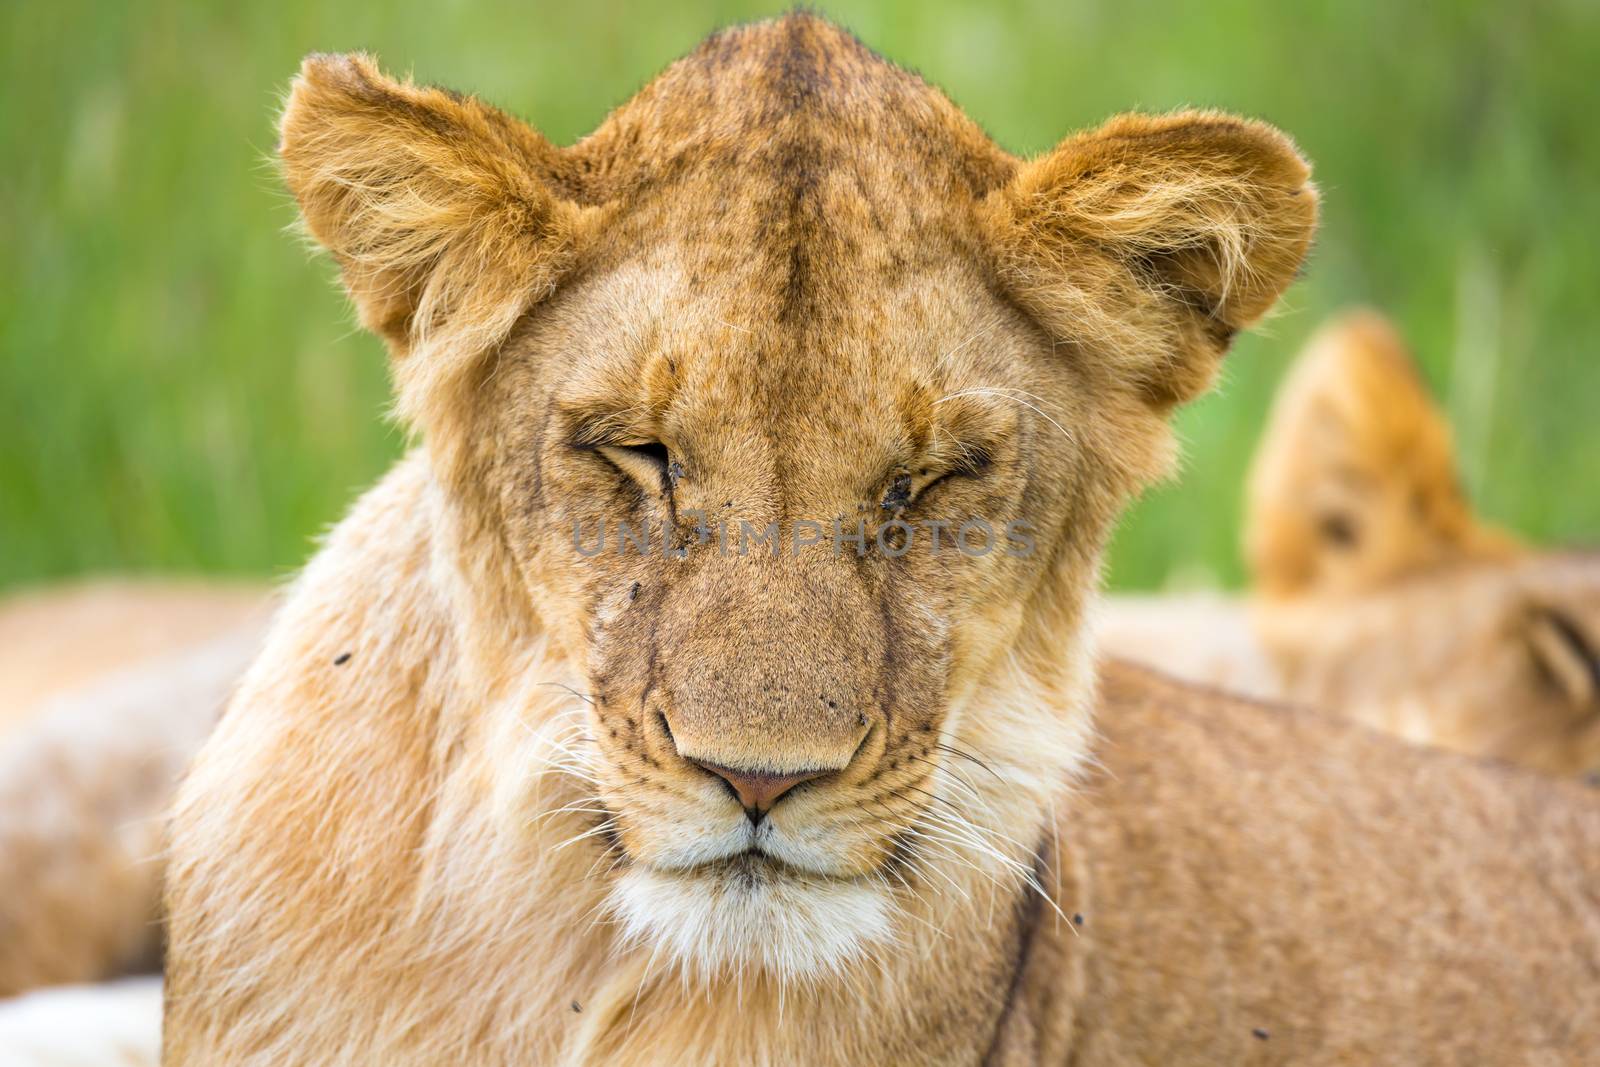 A young lion in close-up, the face of a nearly sleeping lion by 25ehaag6